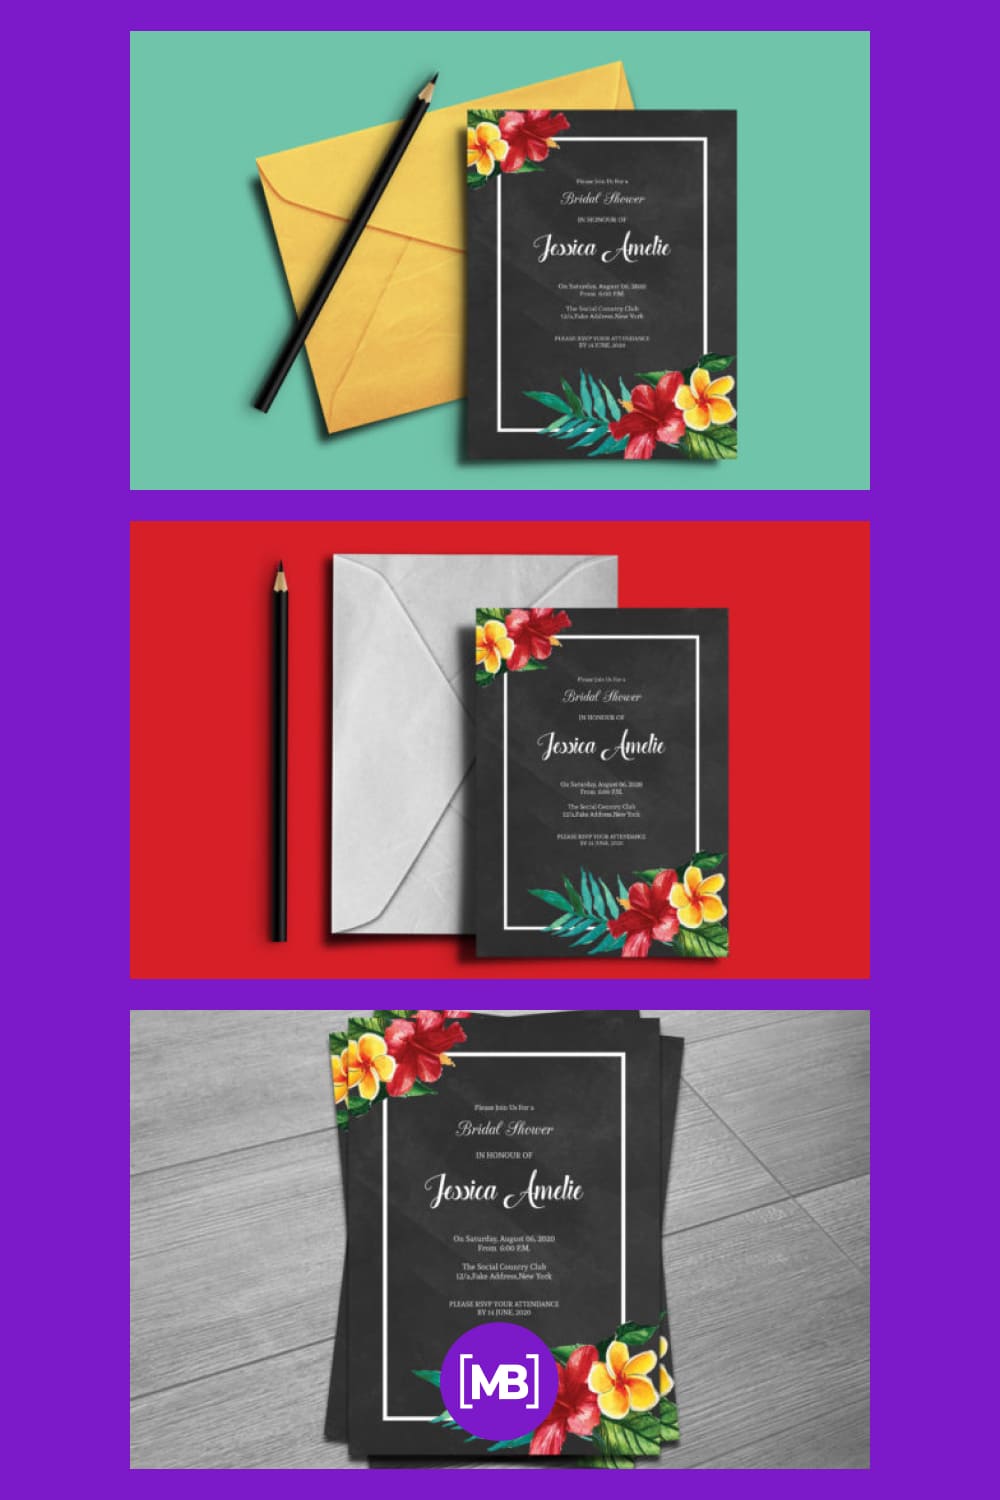 This bridal shower invitation template is affordable and easy to use.